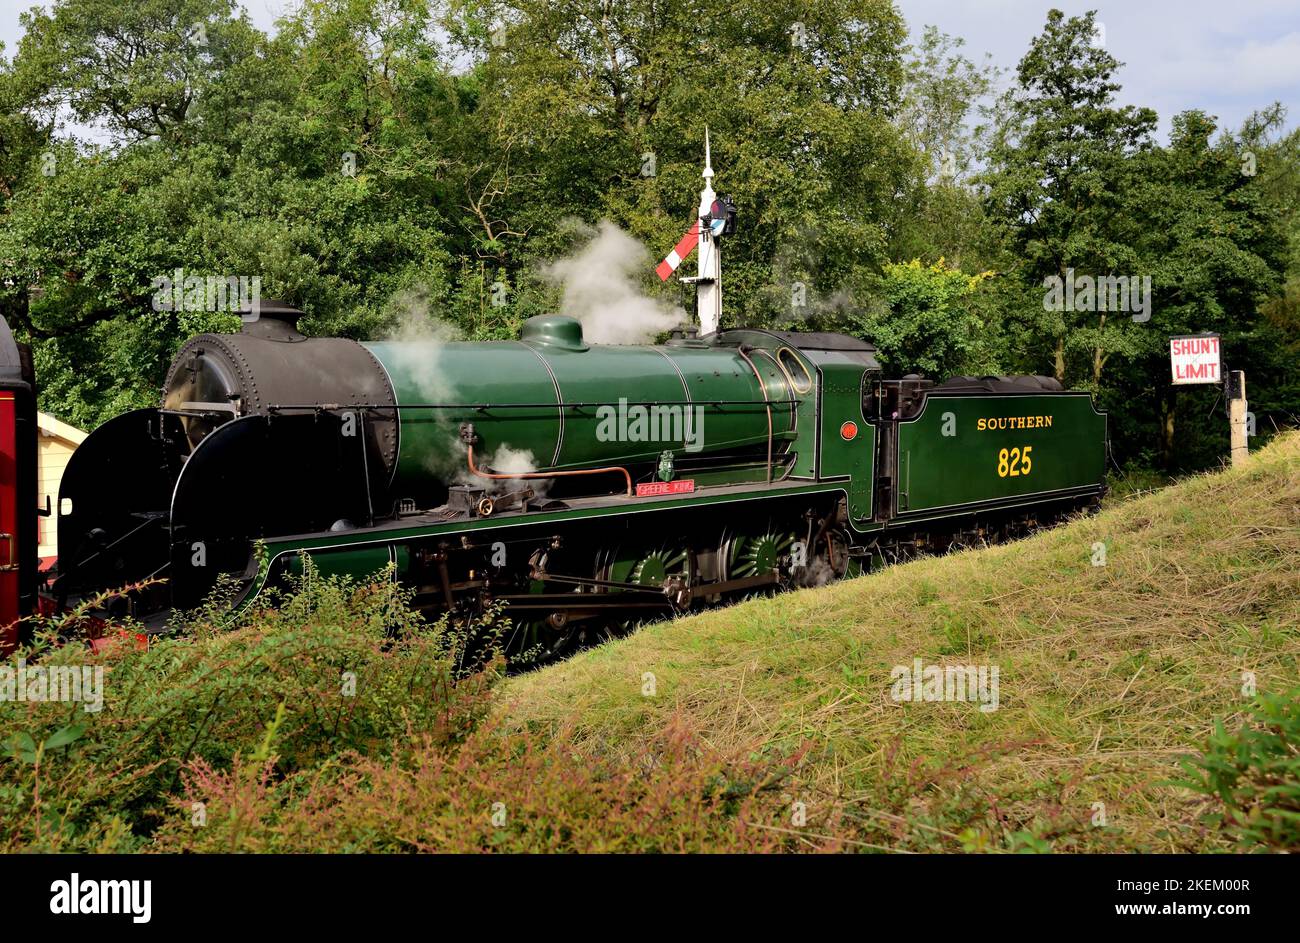 Southern Railway class S15 locomotive No 825 at Goathland, North Yorkshire Moors Railway, carrying the Greene King nameplate, 22.09.2022. Stock Photo